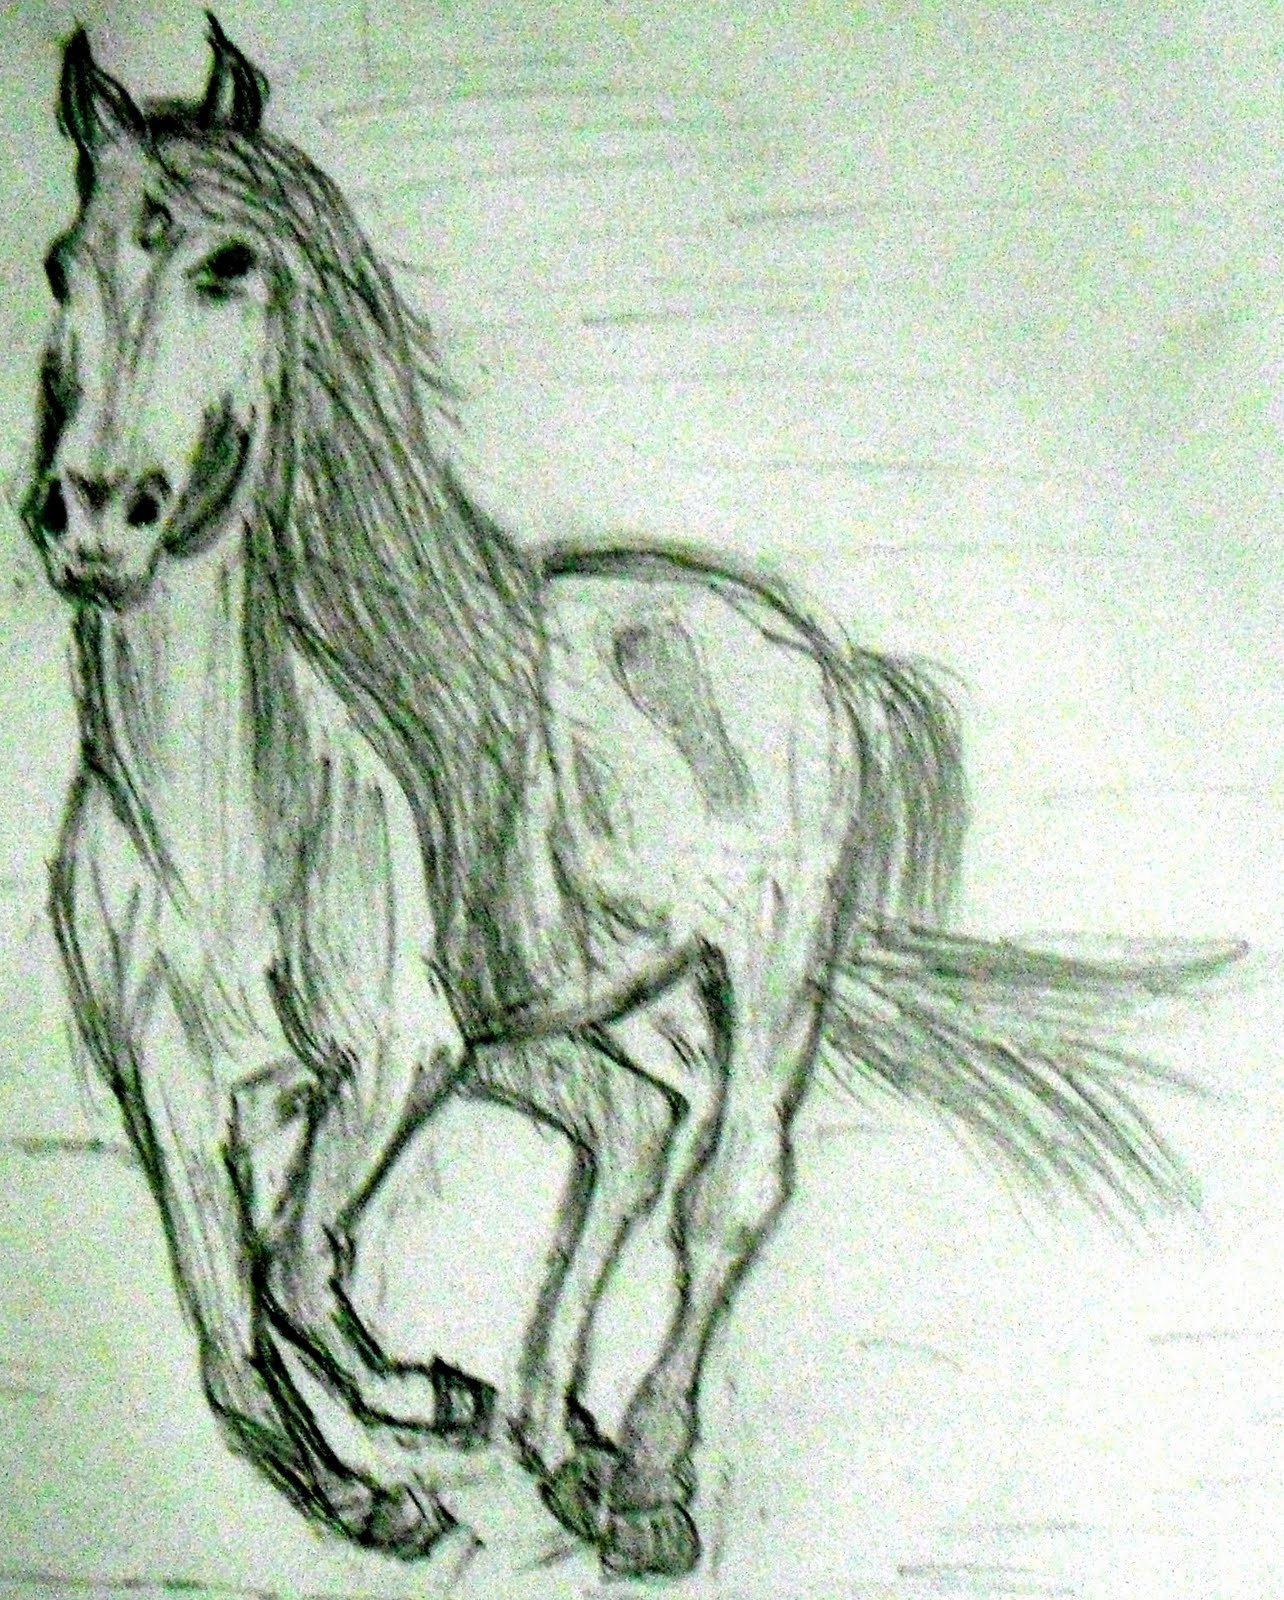 JD's Sketch Blog: A Galloping Horse - Pencil Sketch